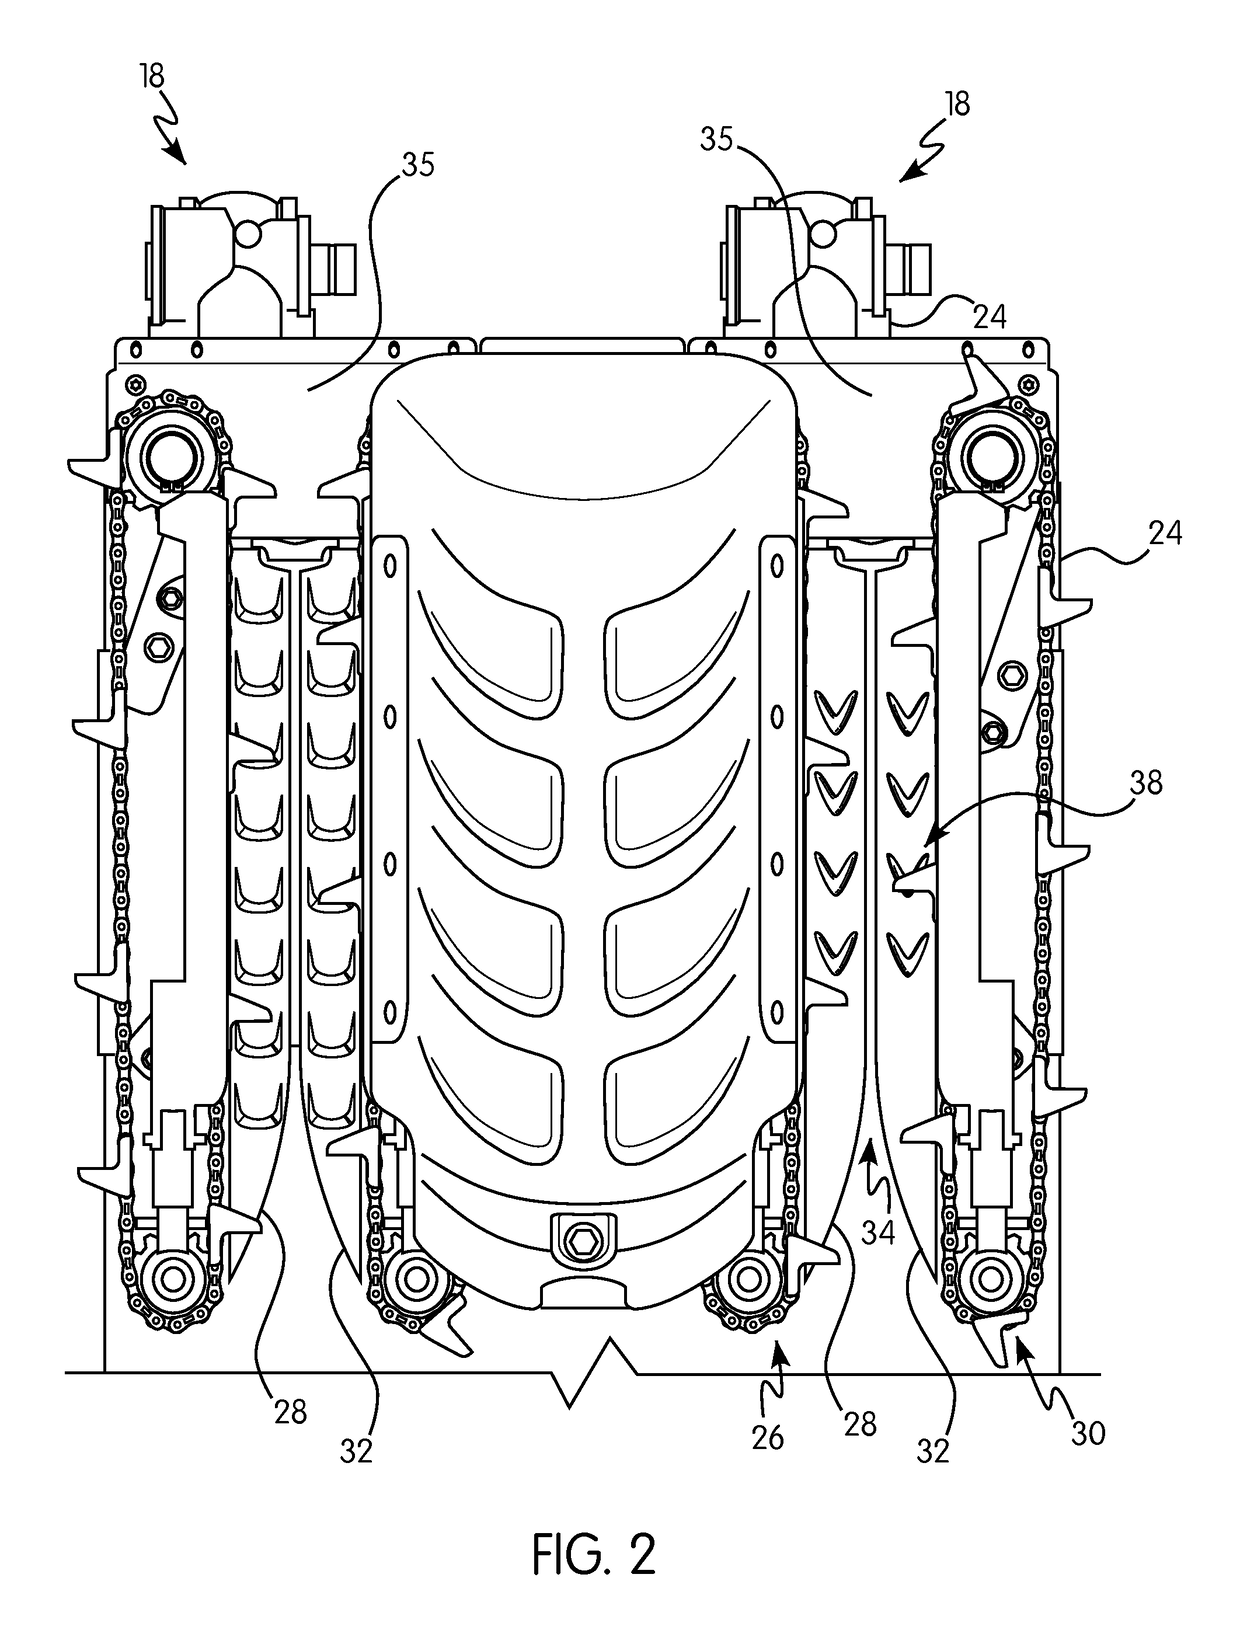 Row unit of a corn header having a deck plate with a structured surface